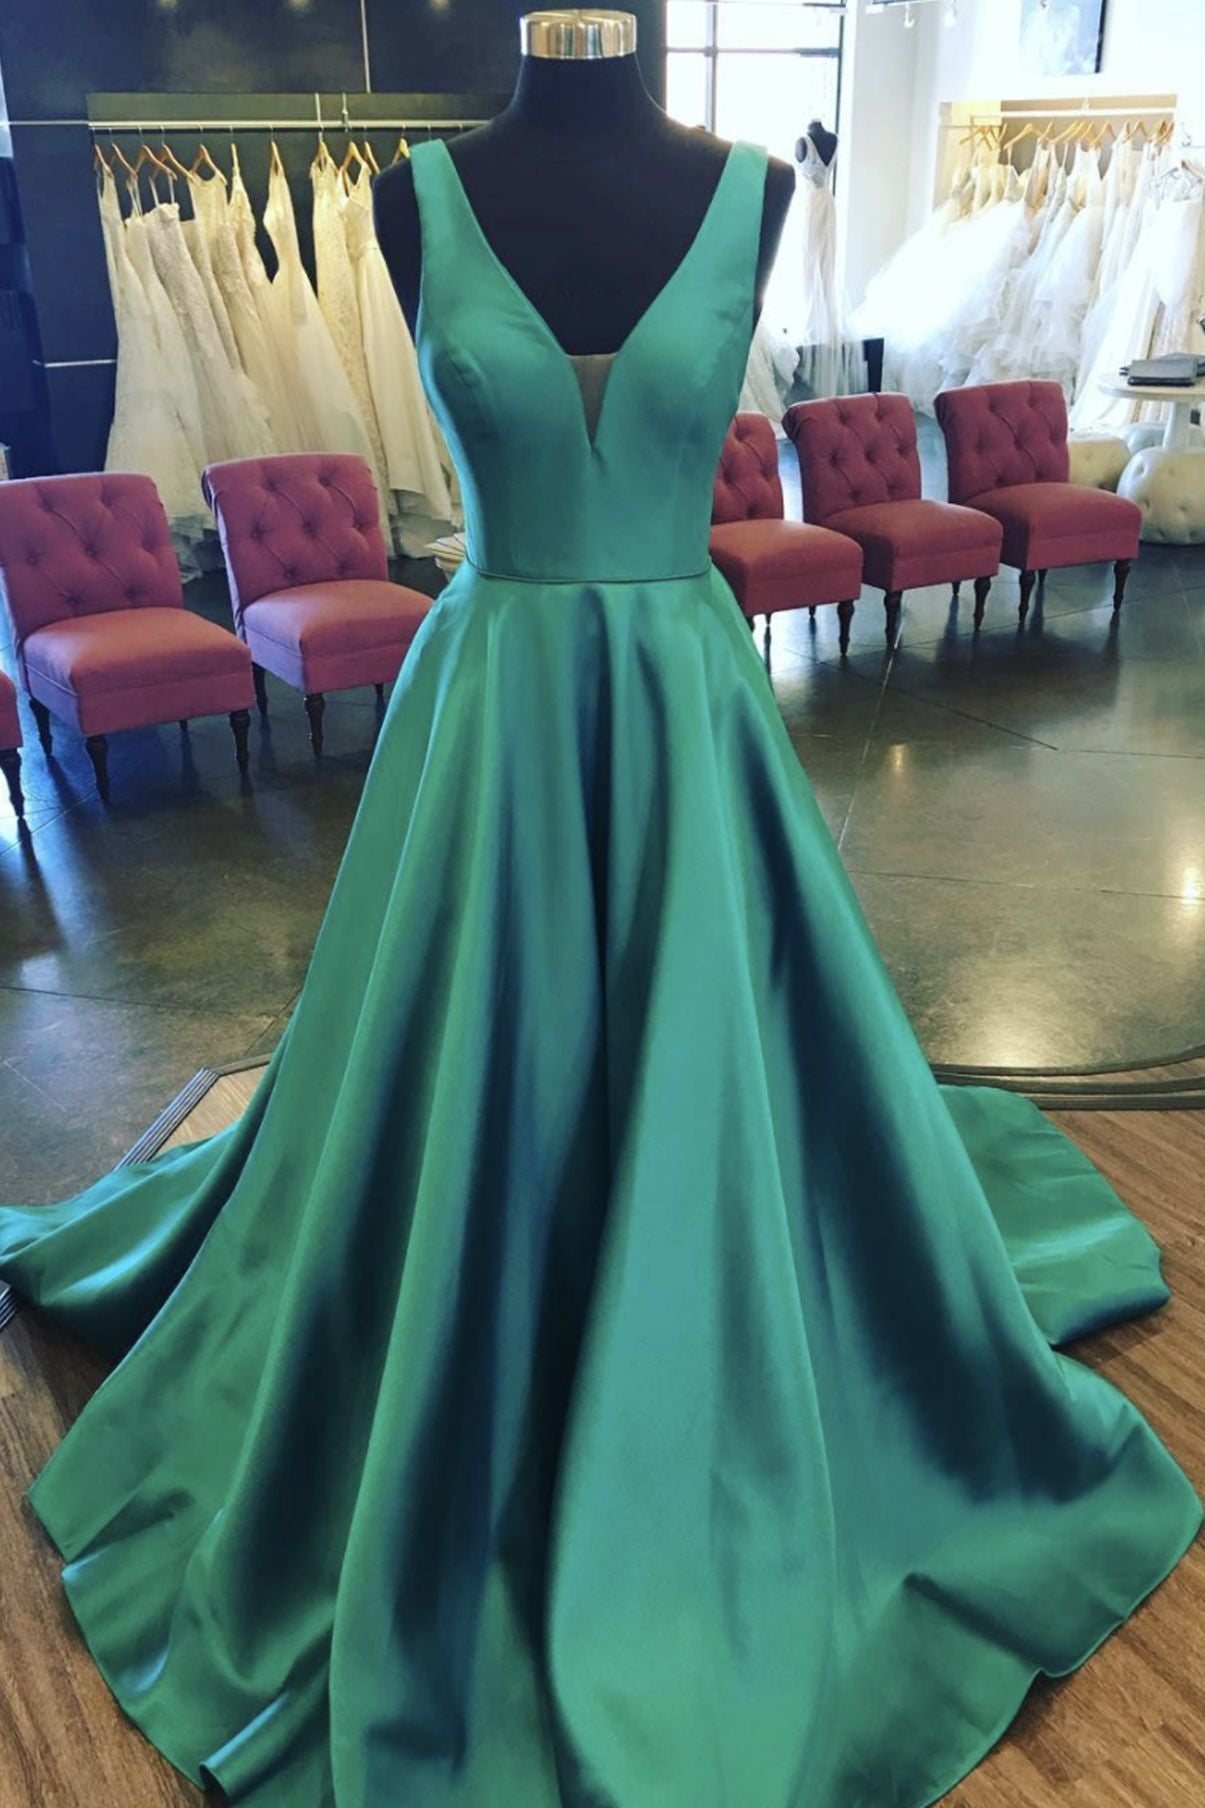 Satin Green Prom Dress Outfits For Girls,Long Evening Dress Outfits For Girls,Birthday Party Gown Long, V Neck Back to School